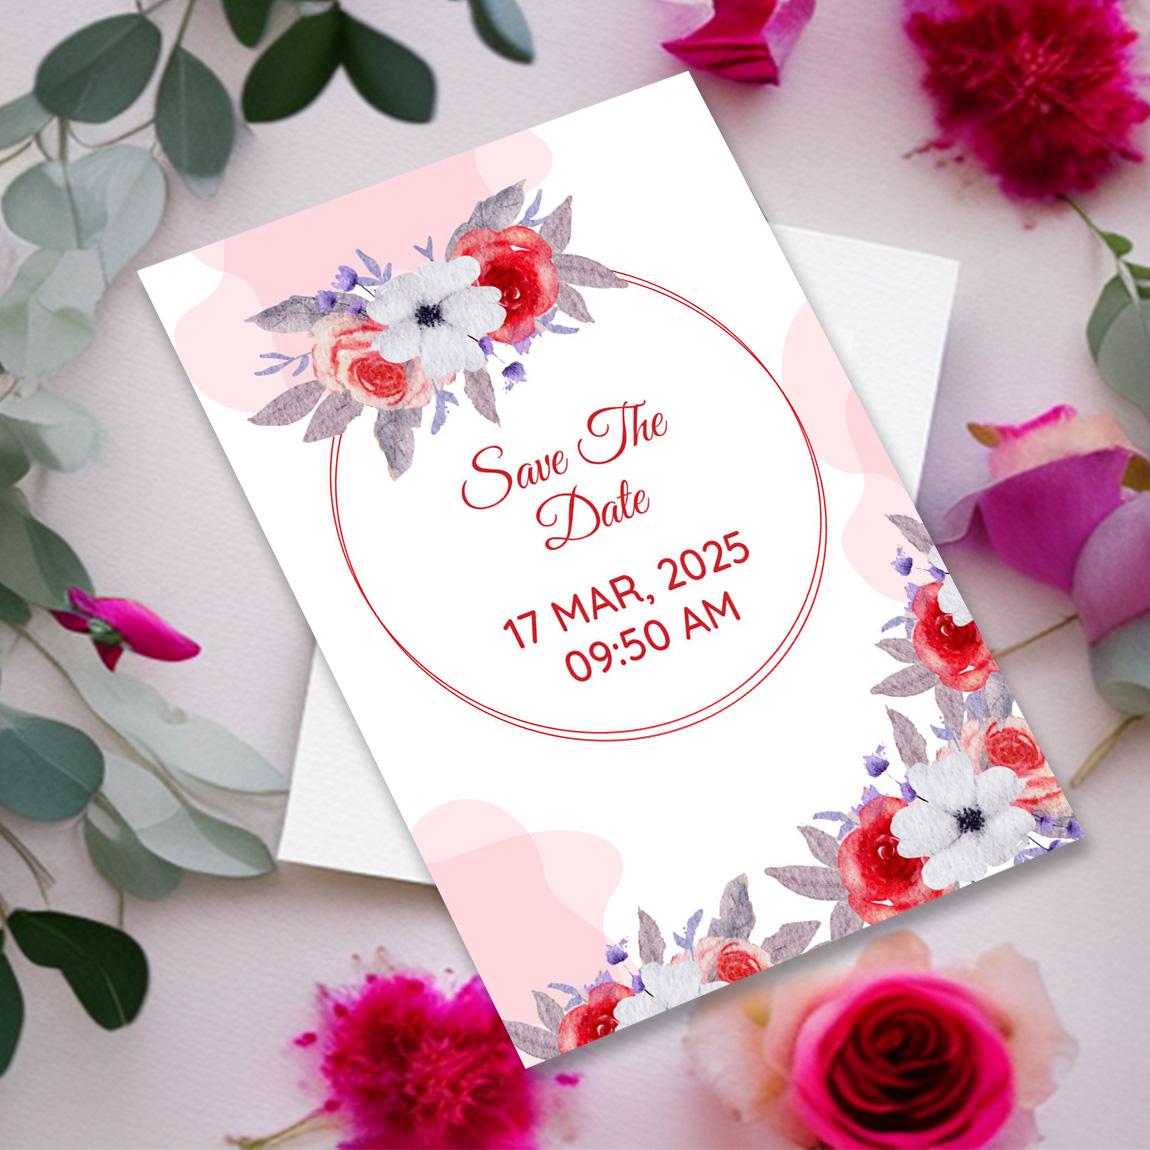 Image with exquisite wedding invitation in pink colors and flowers.